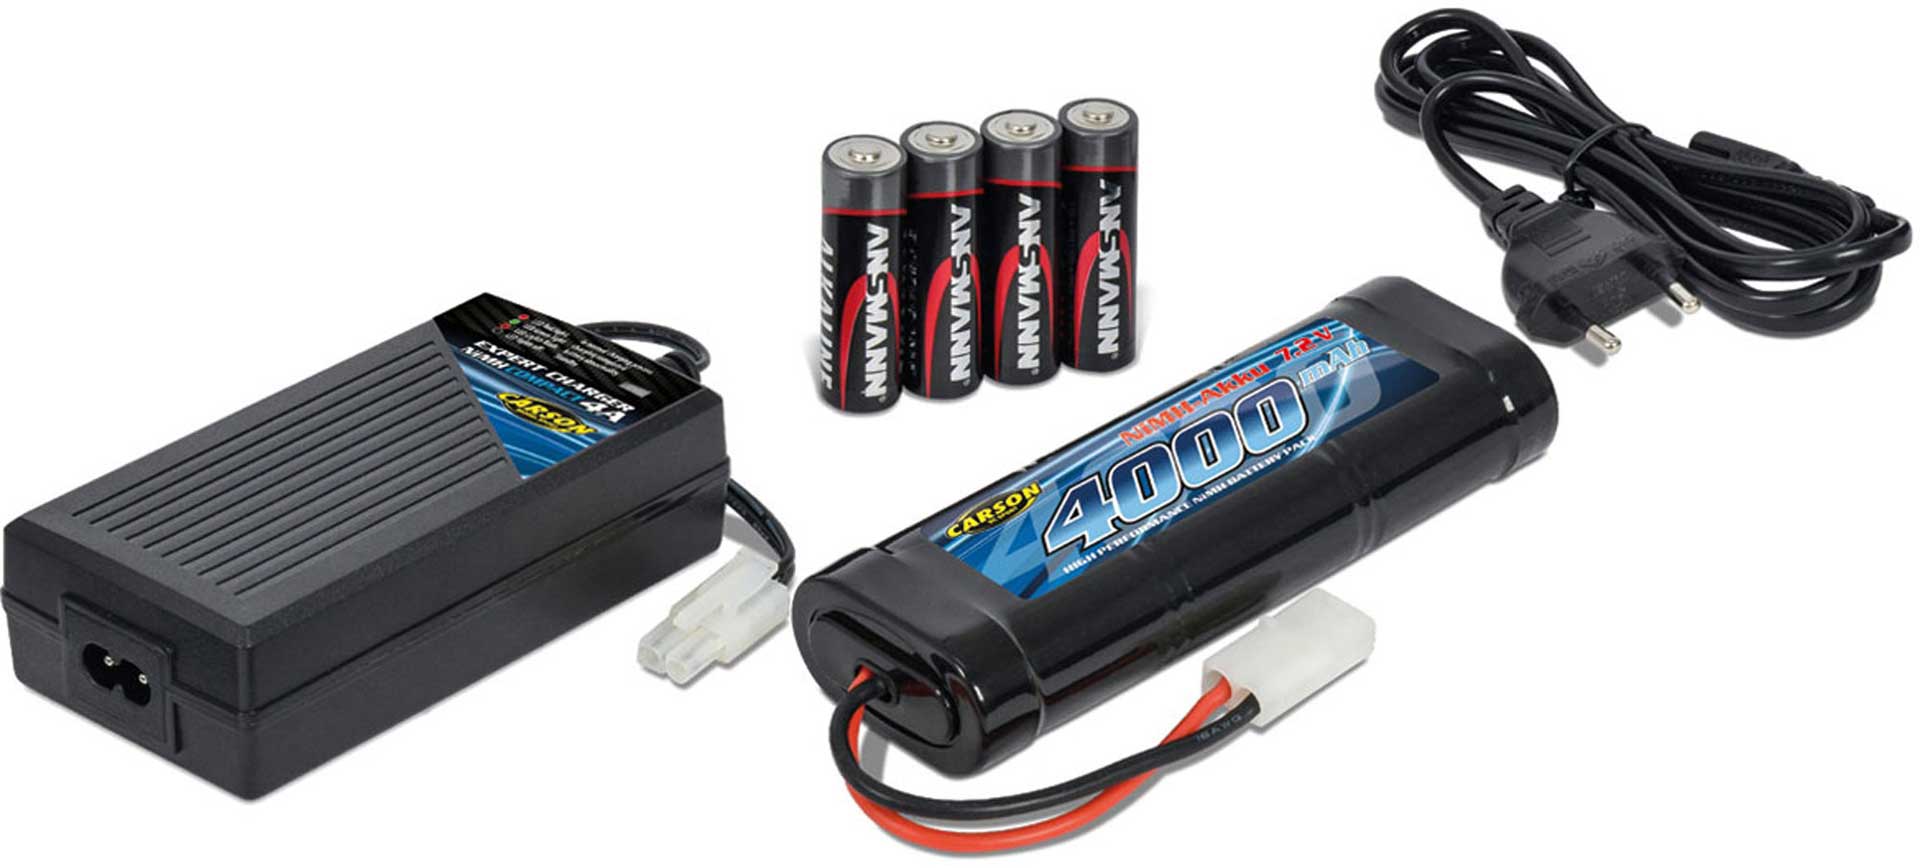 CARSON EXPERT CHARGER NIMH COMPACT 4A CHARGING SET INCL. 7,2VOLT 4000MAH BATTERY PACK AND 4AA BATTERIES